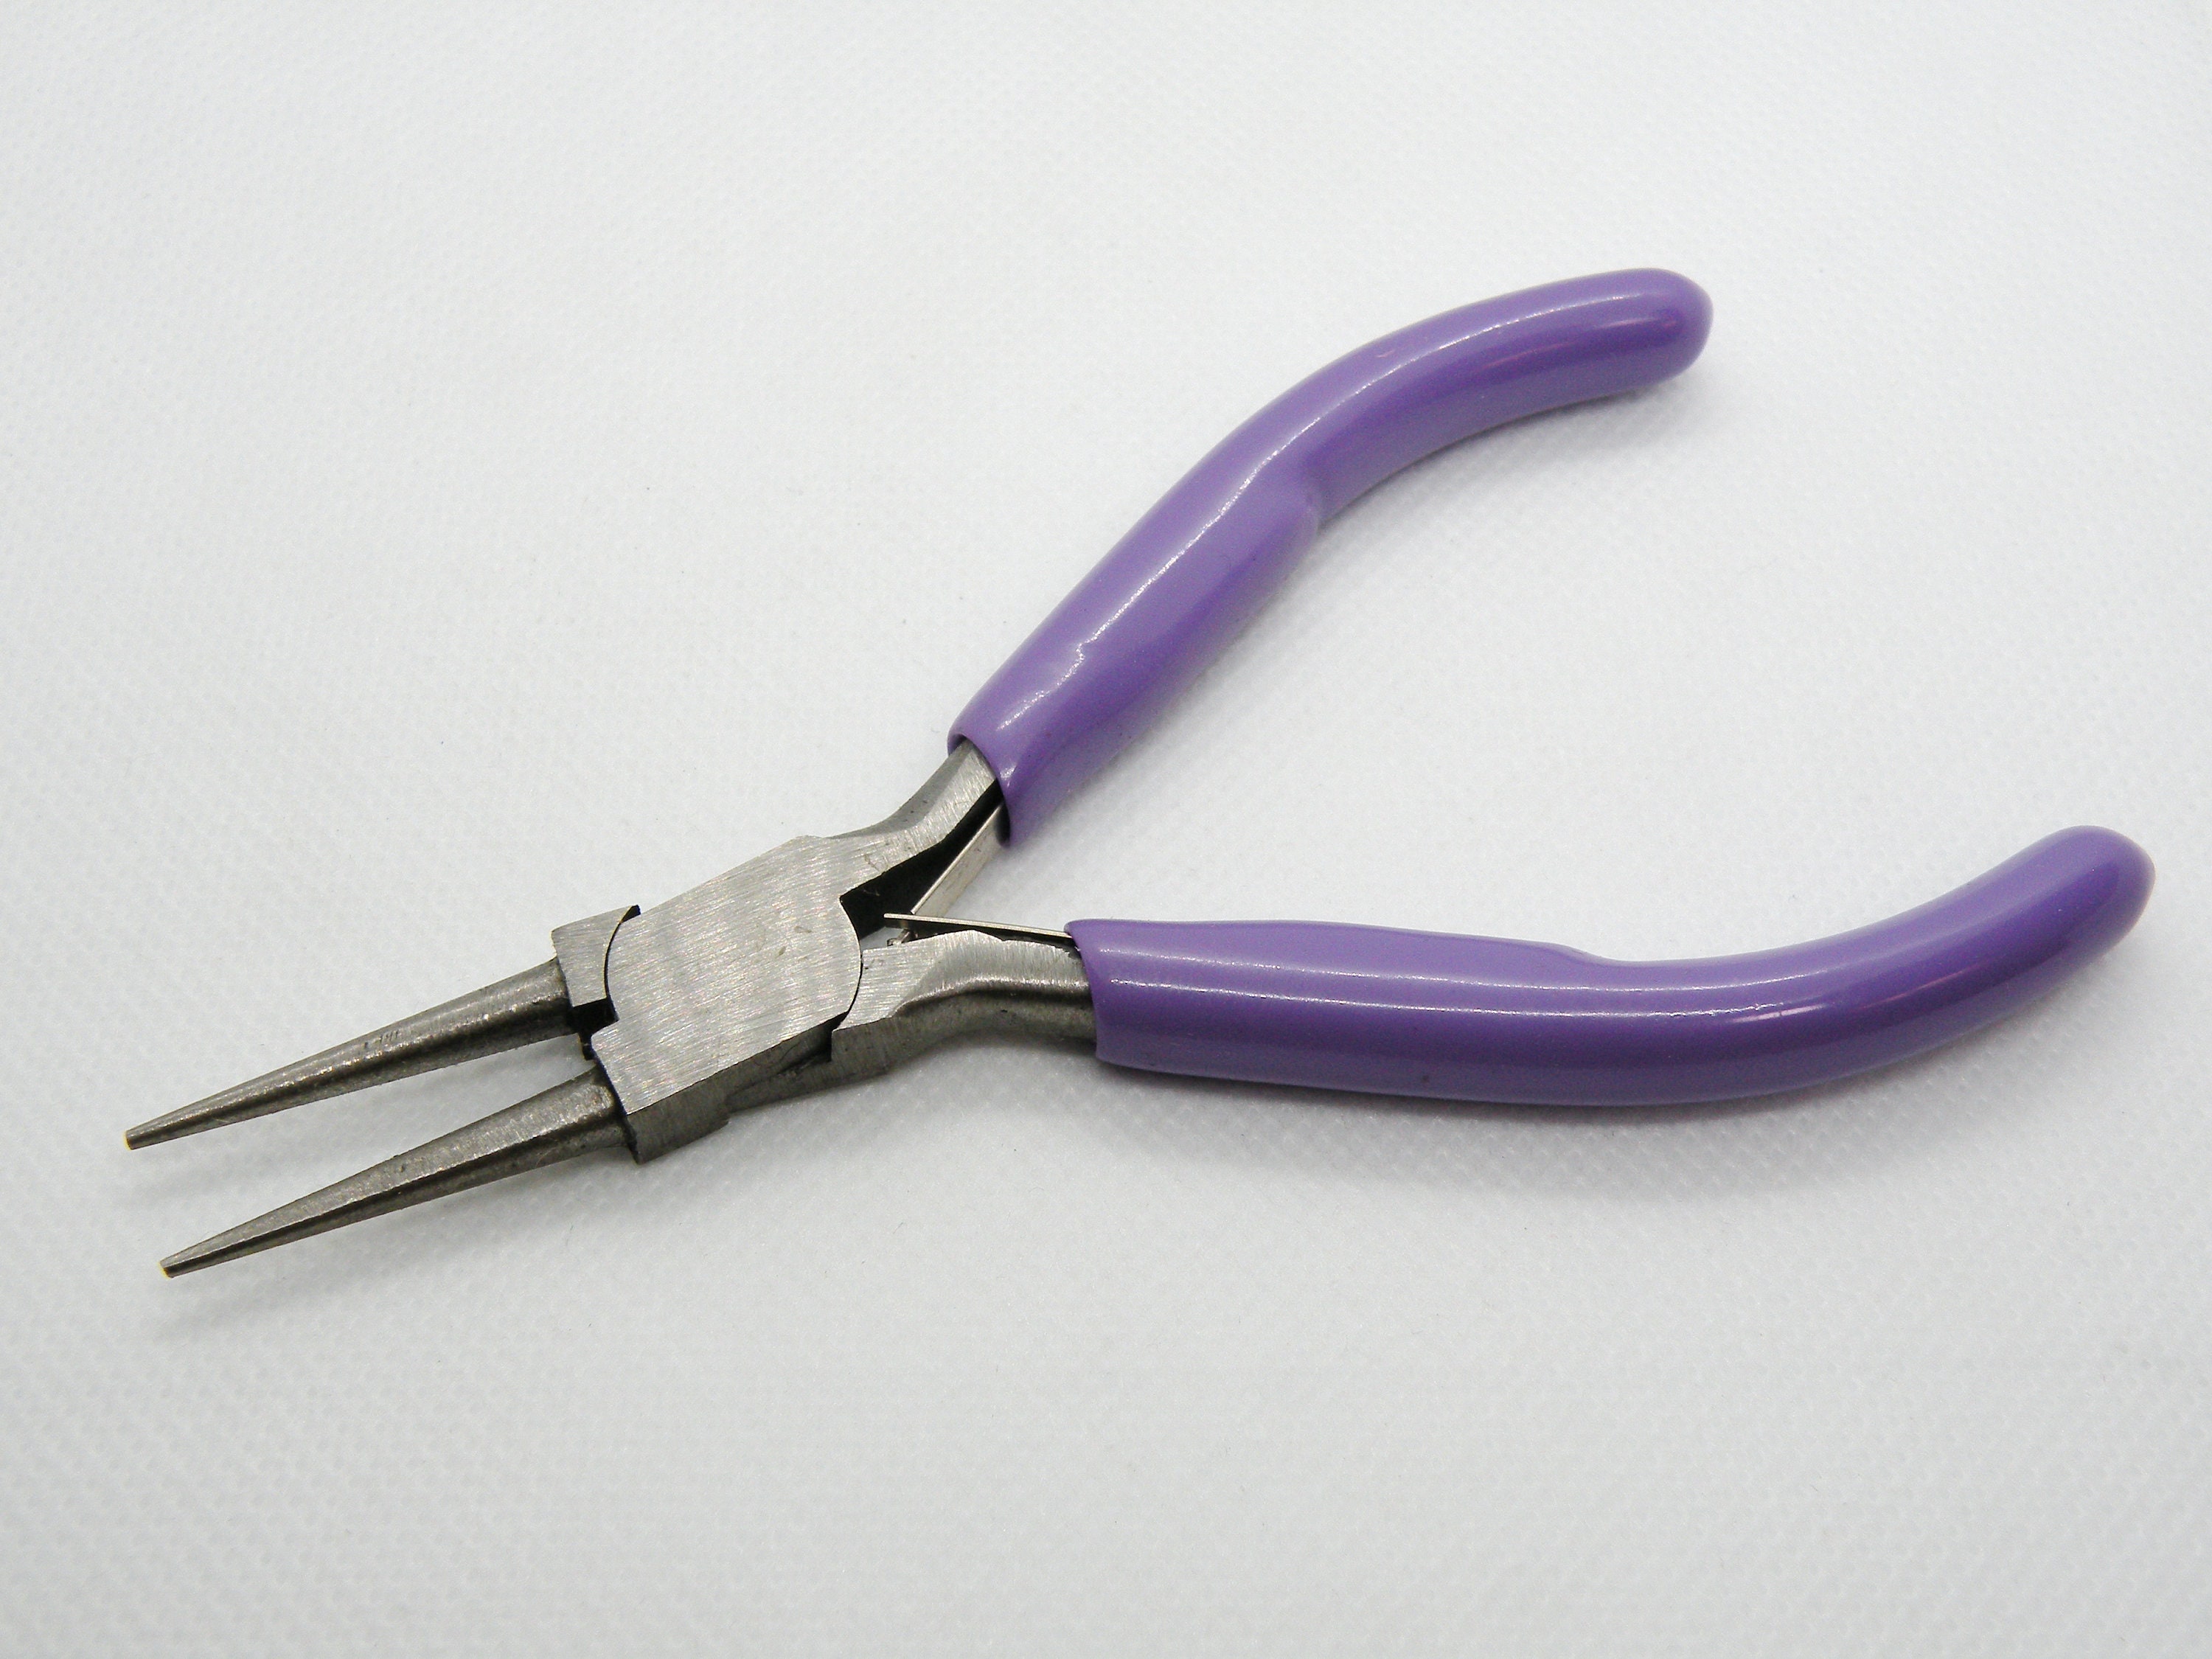 1 x Lilac Polishing Carbon Steel Jewelry Tools Jewelry Pliers For Jewelry  Making